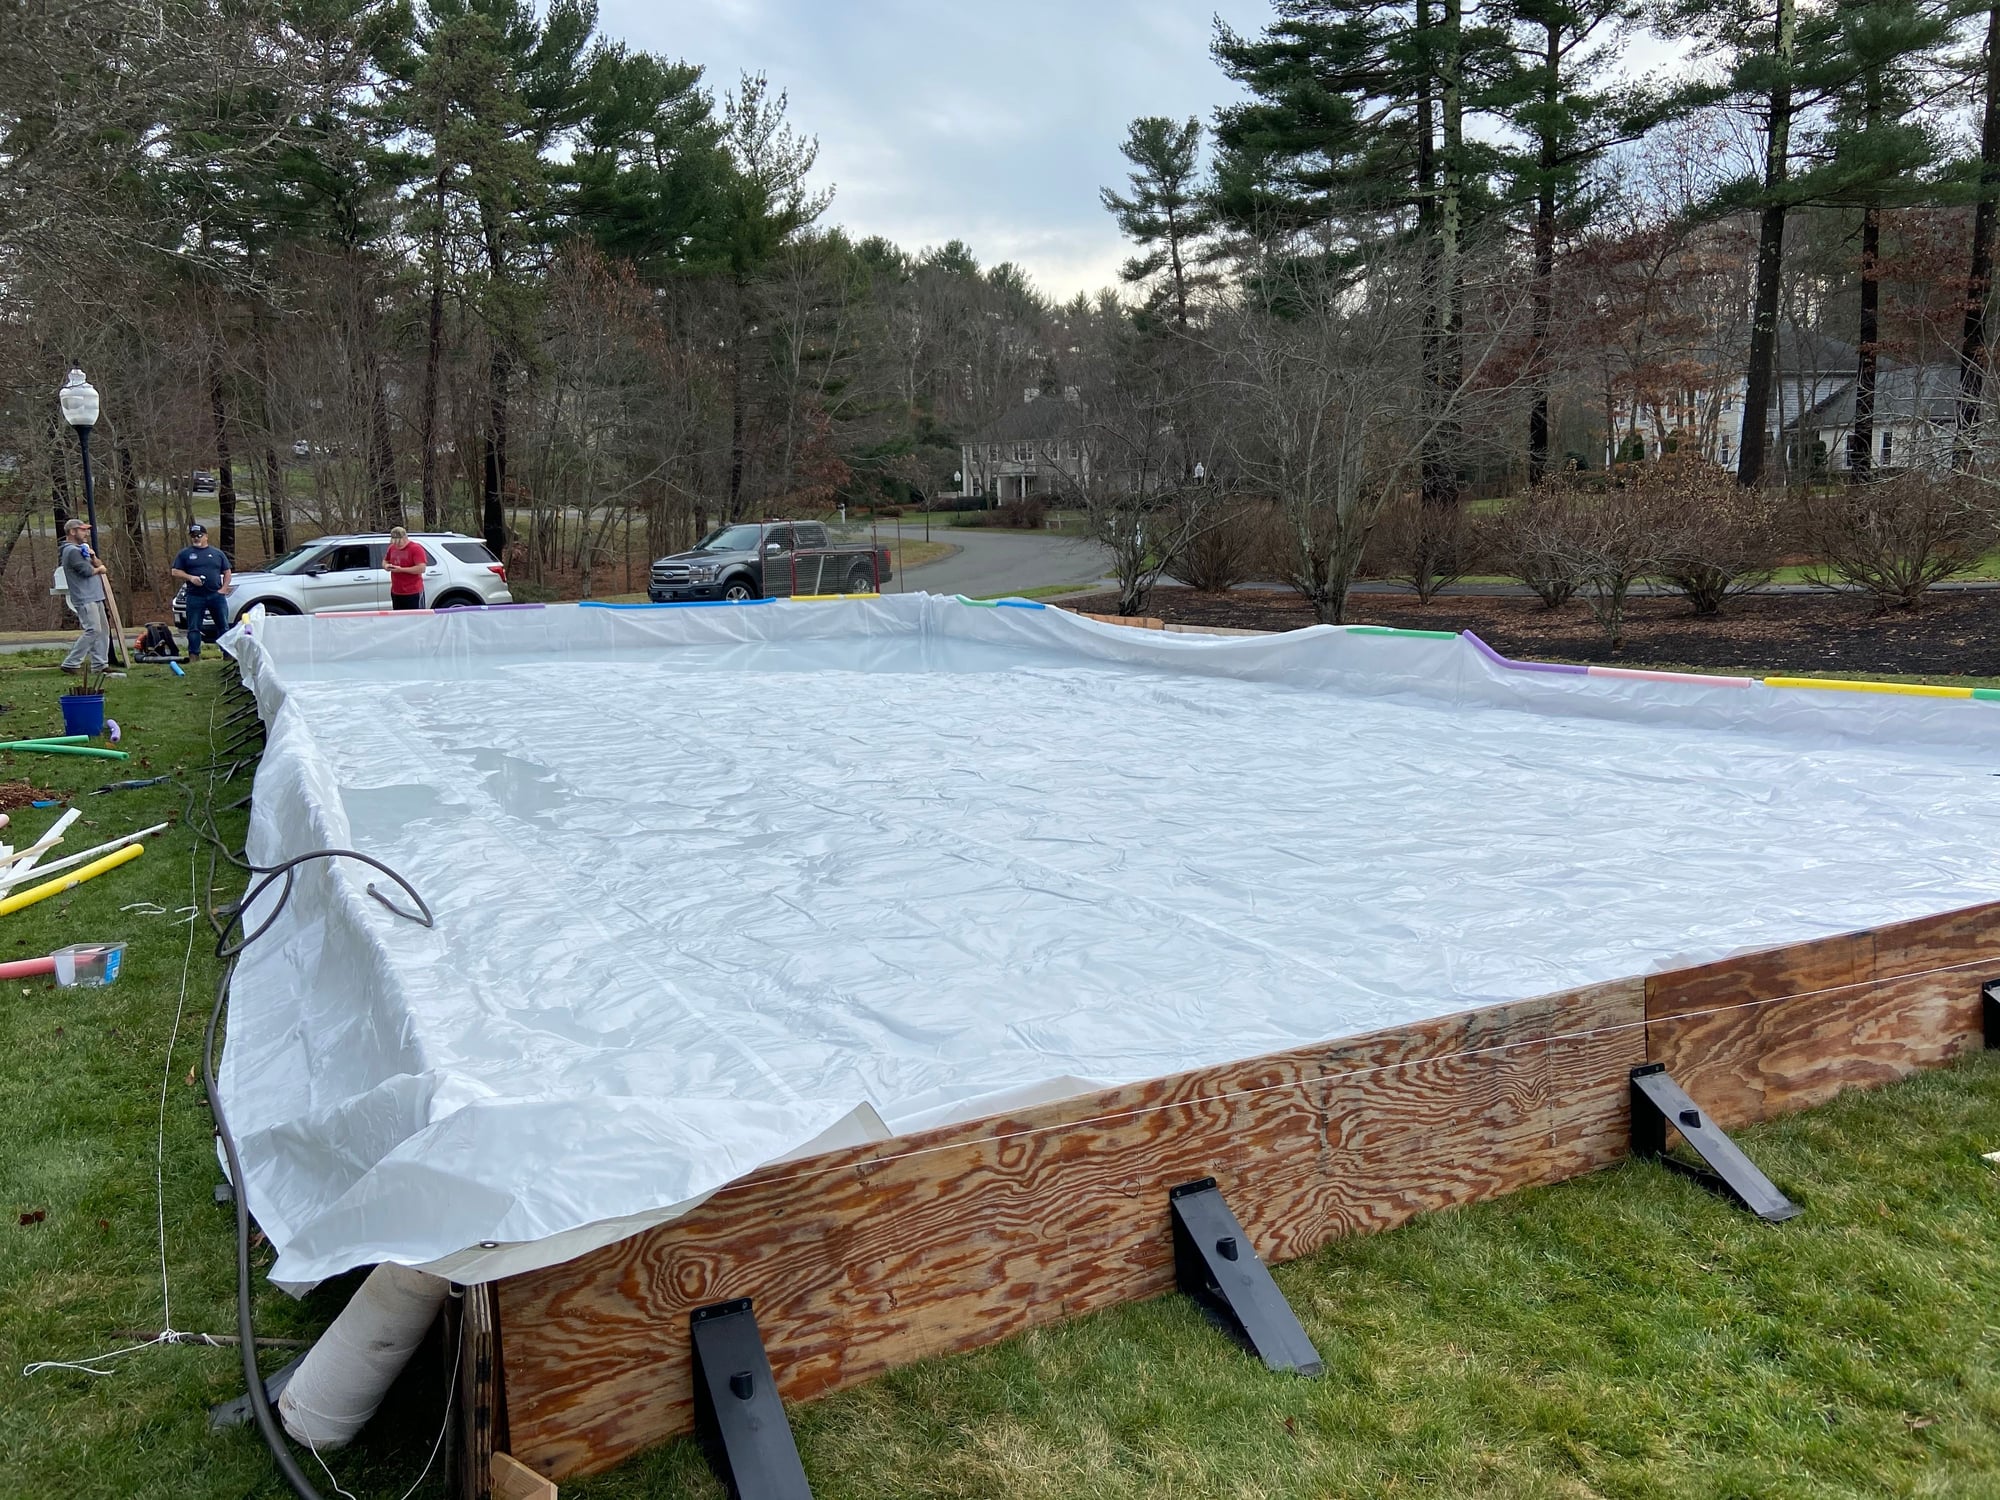 Backyard Ice Rink - Page 2 - The Hull Truth - Boating and ...